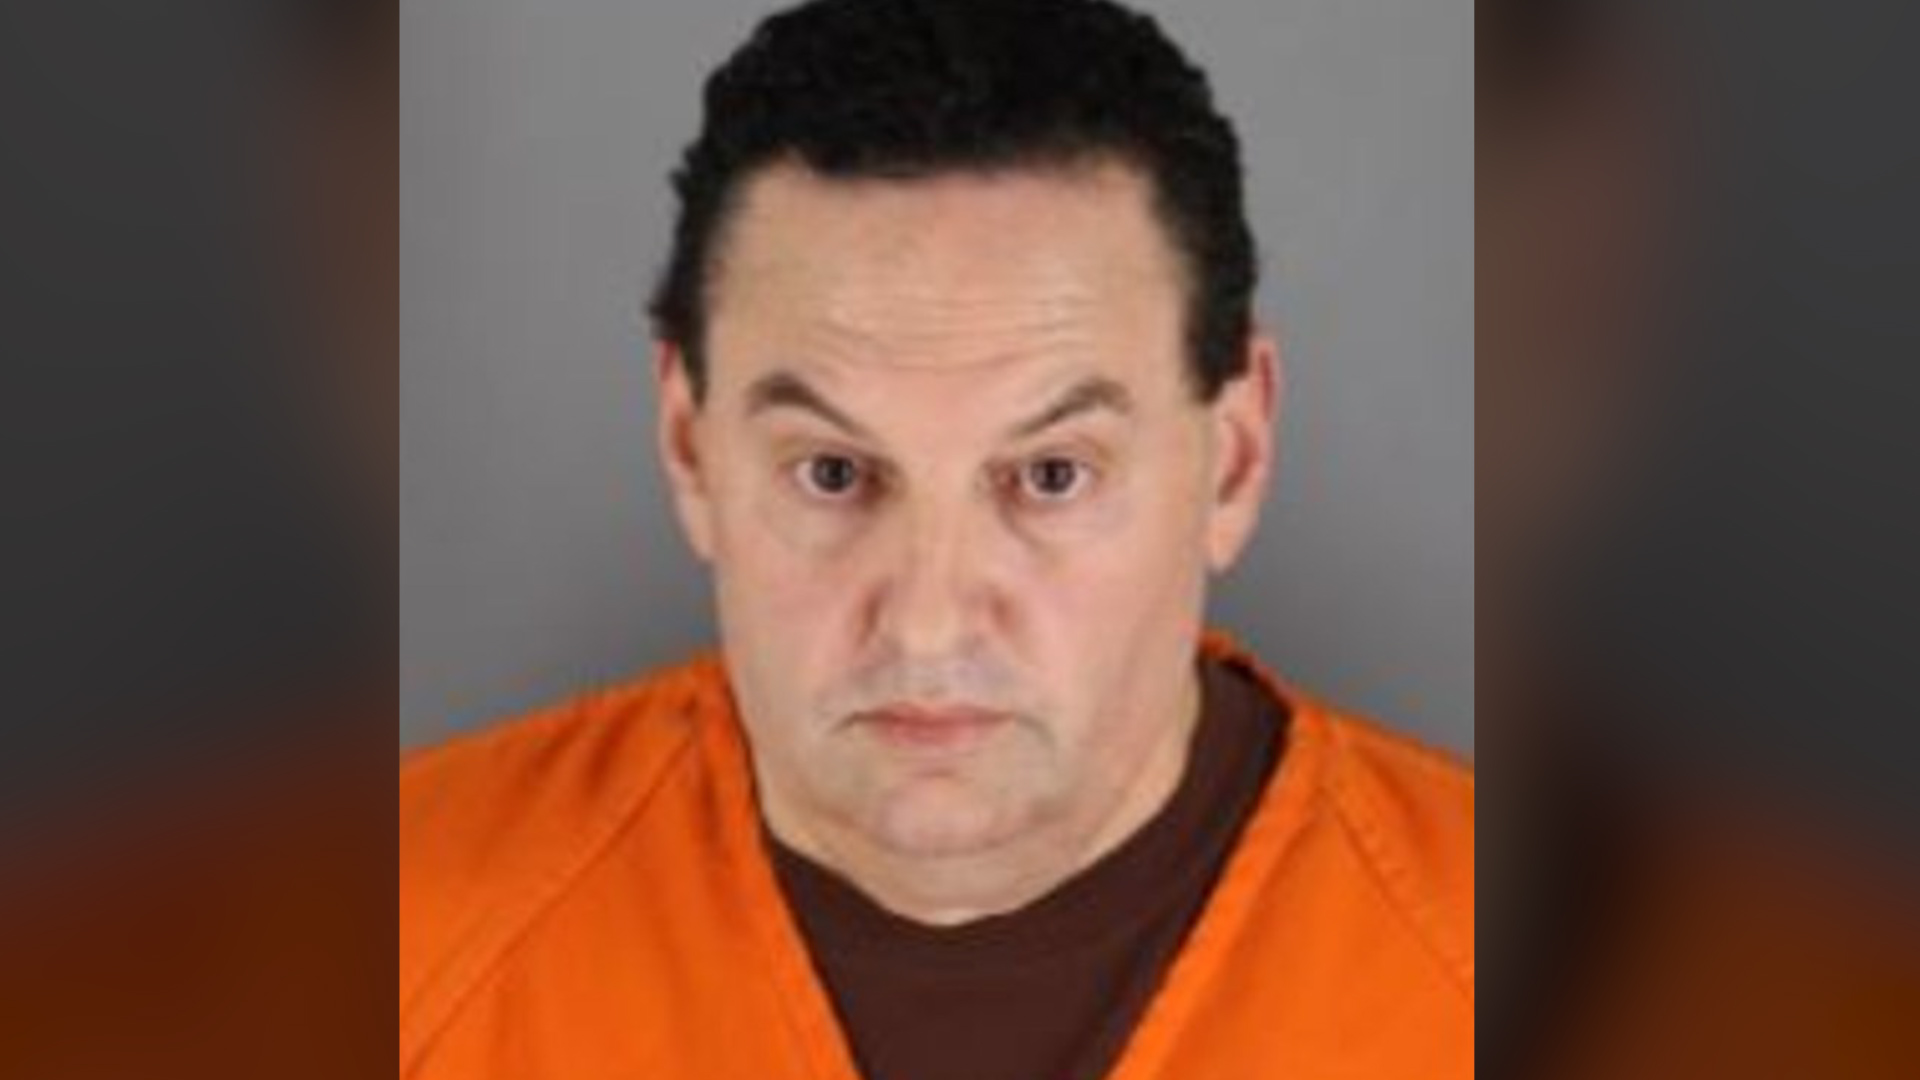 Jerry A. Westrom, 52, of Isanti, was charged in Hennepin County District Court with second-degree murder in the stabbing death of 35-year-old Jeanne Ann "Jeannie" Childs in June 1993.